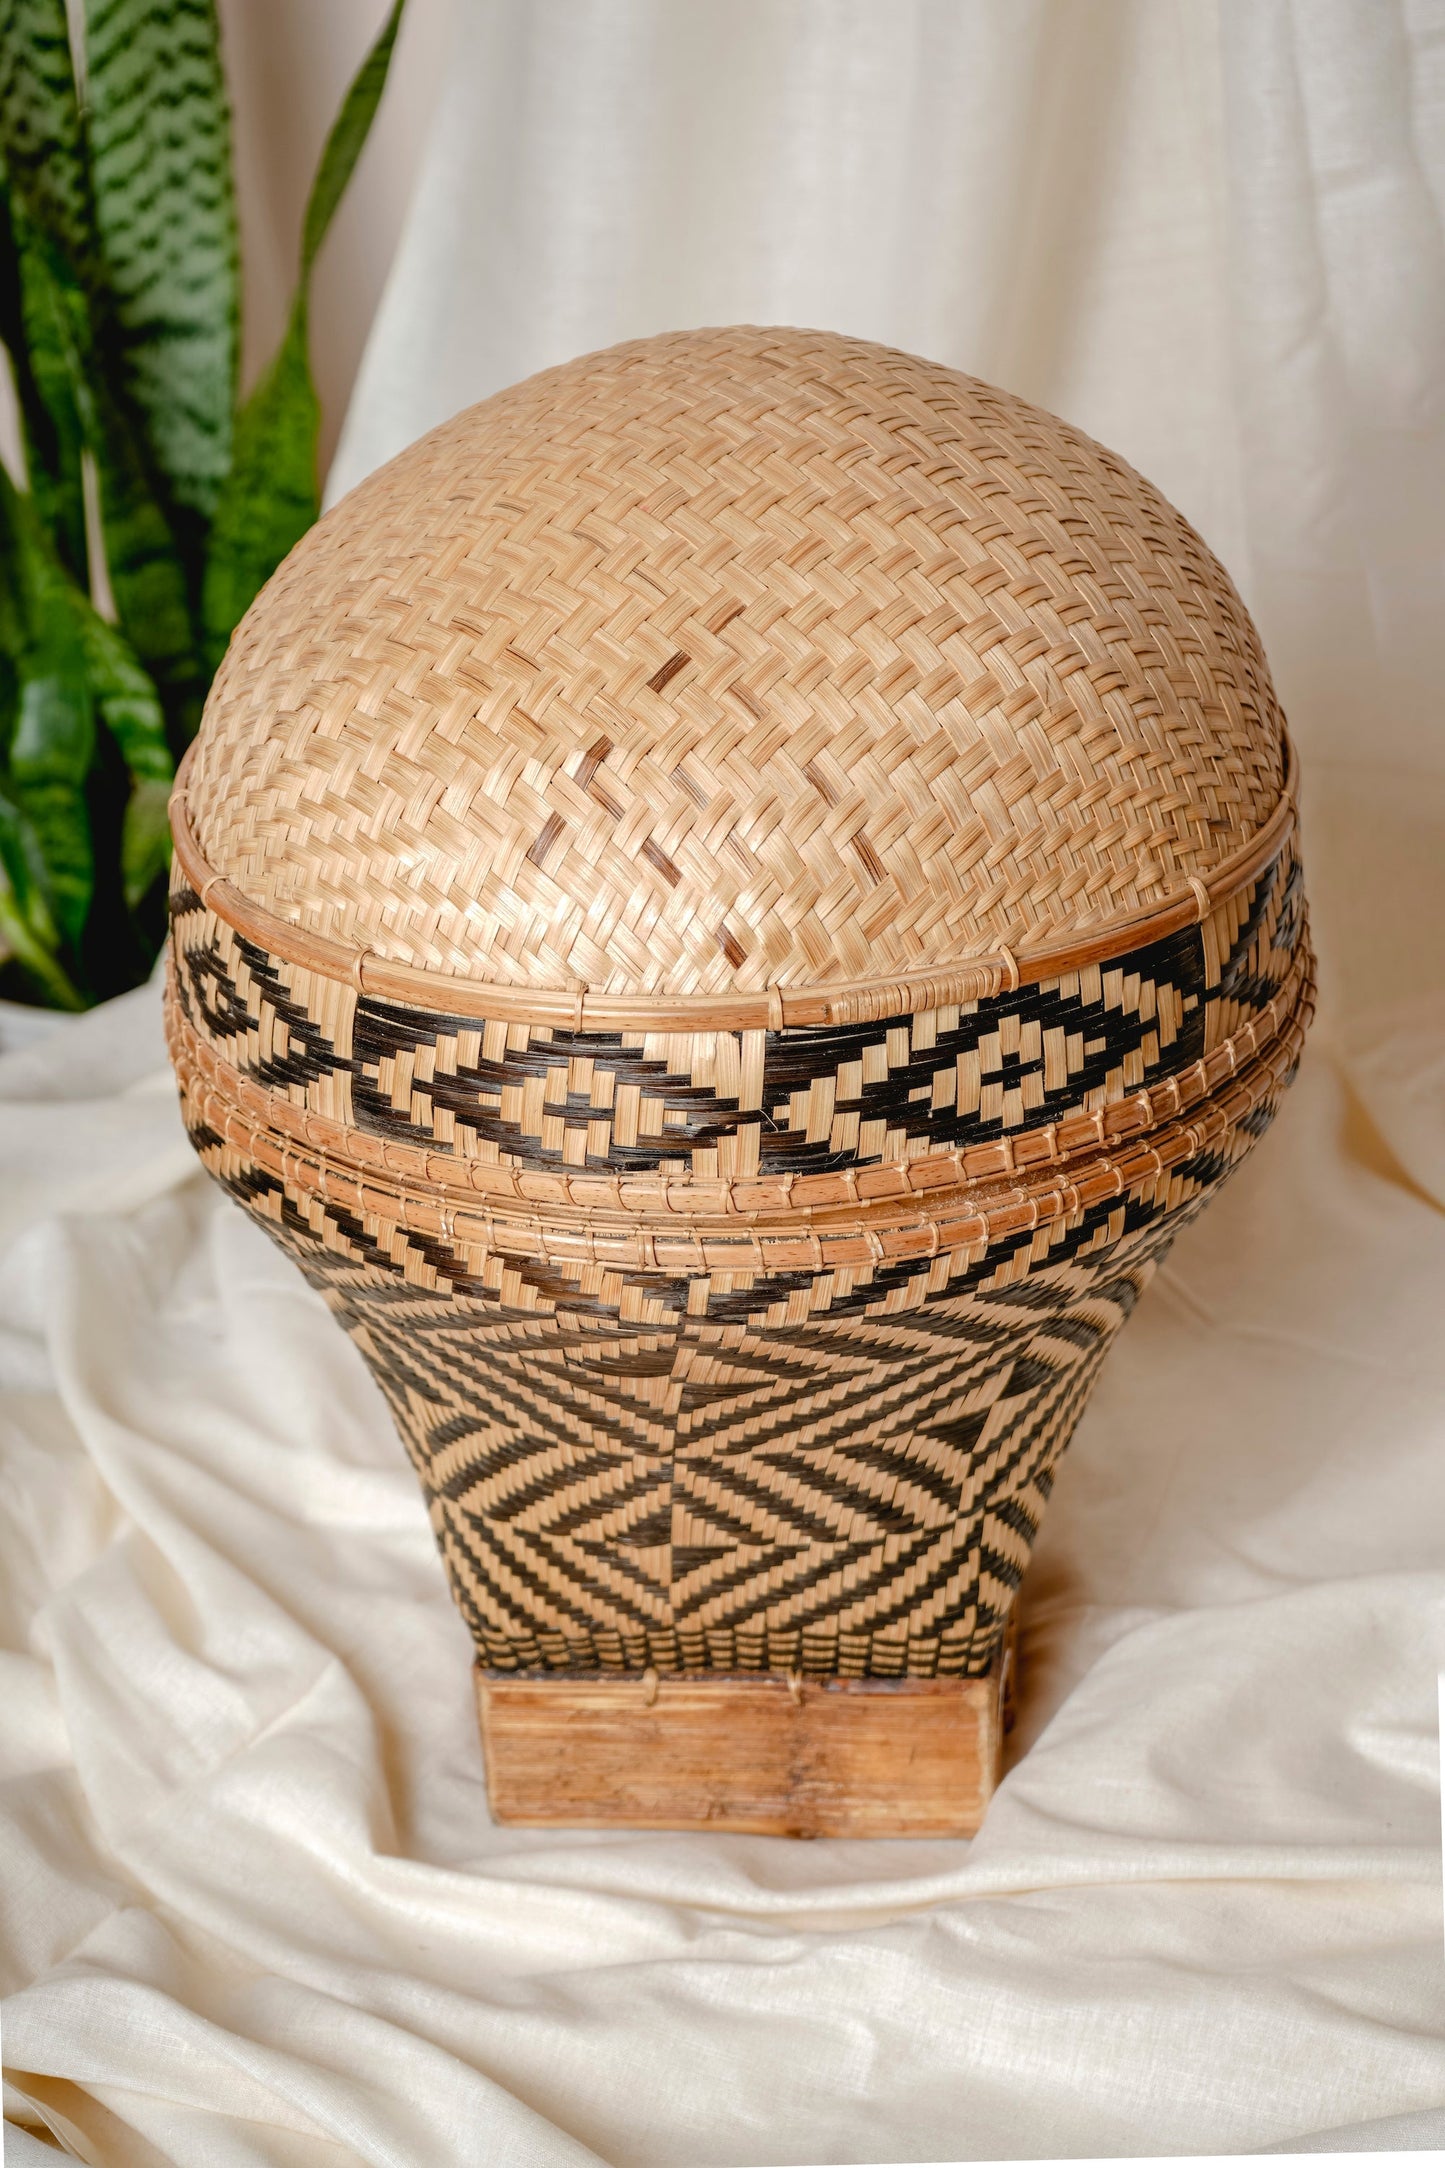 Woven Patterned Dome Lid Basket